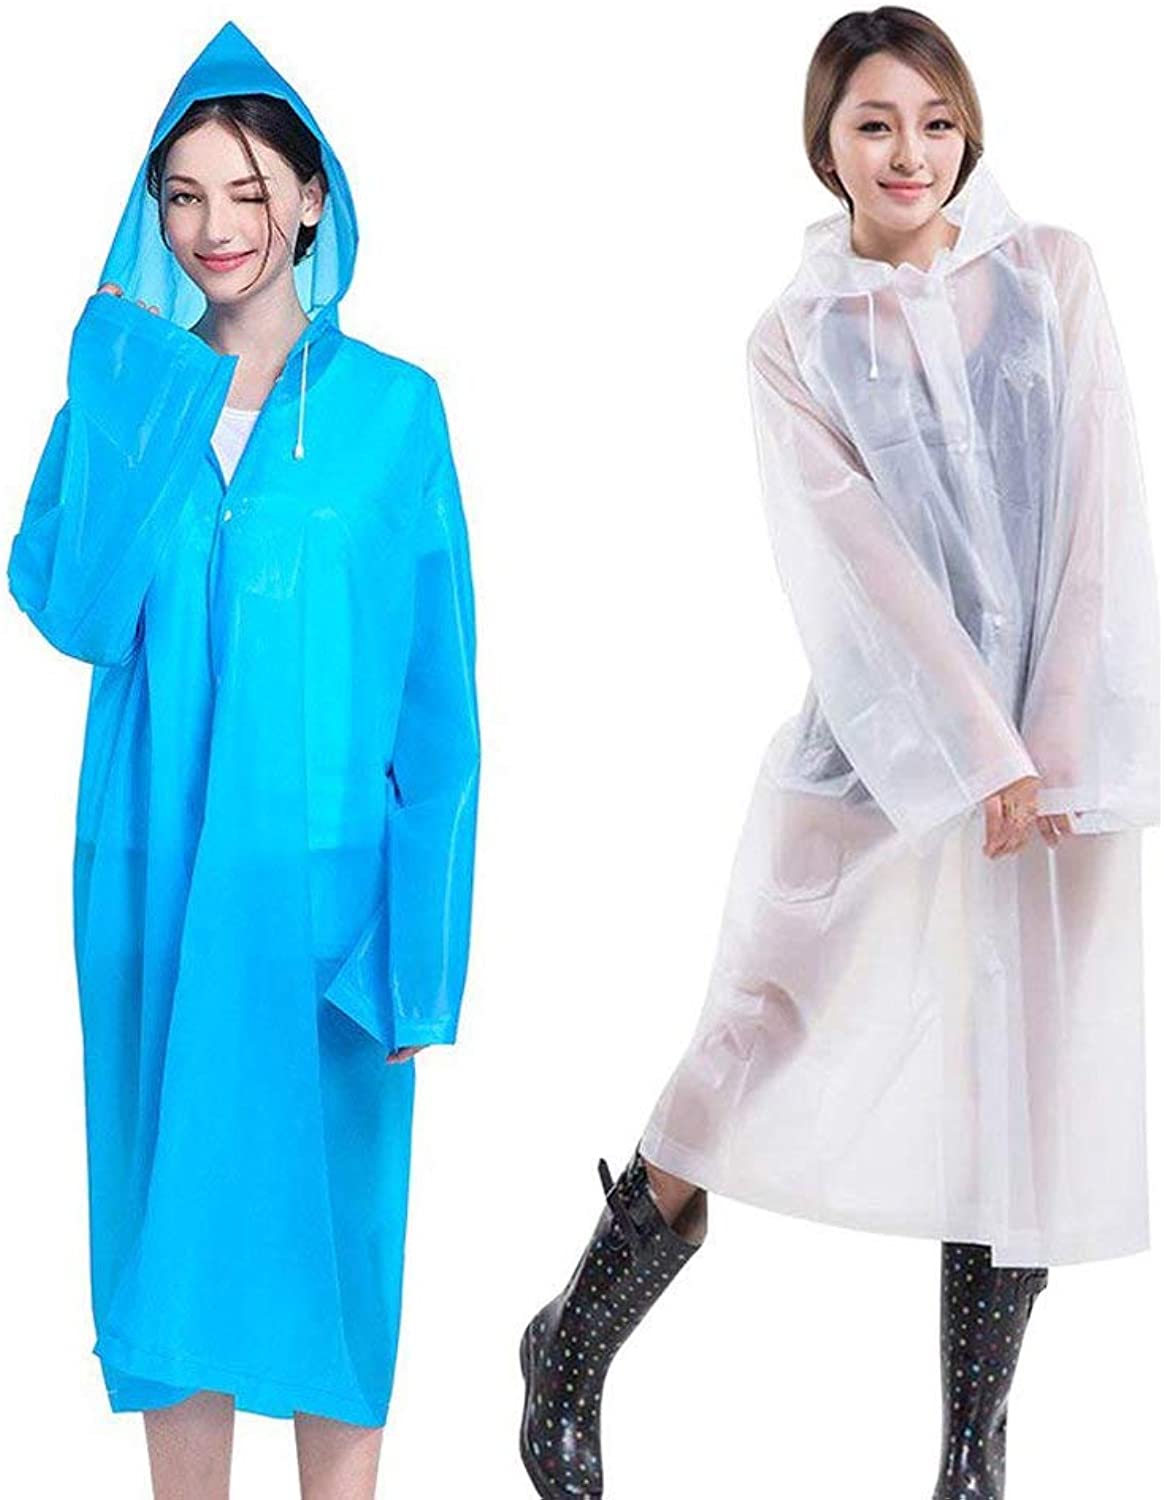 Nyicey Adult Rain Ponchos, 2 Packs Portable Reusable Emergency Raincoats for Camping Hiking Traveling Backpacking